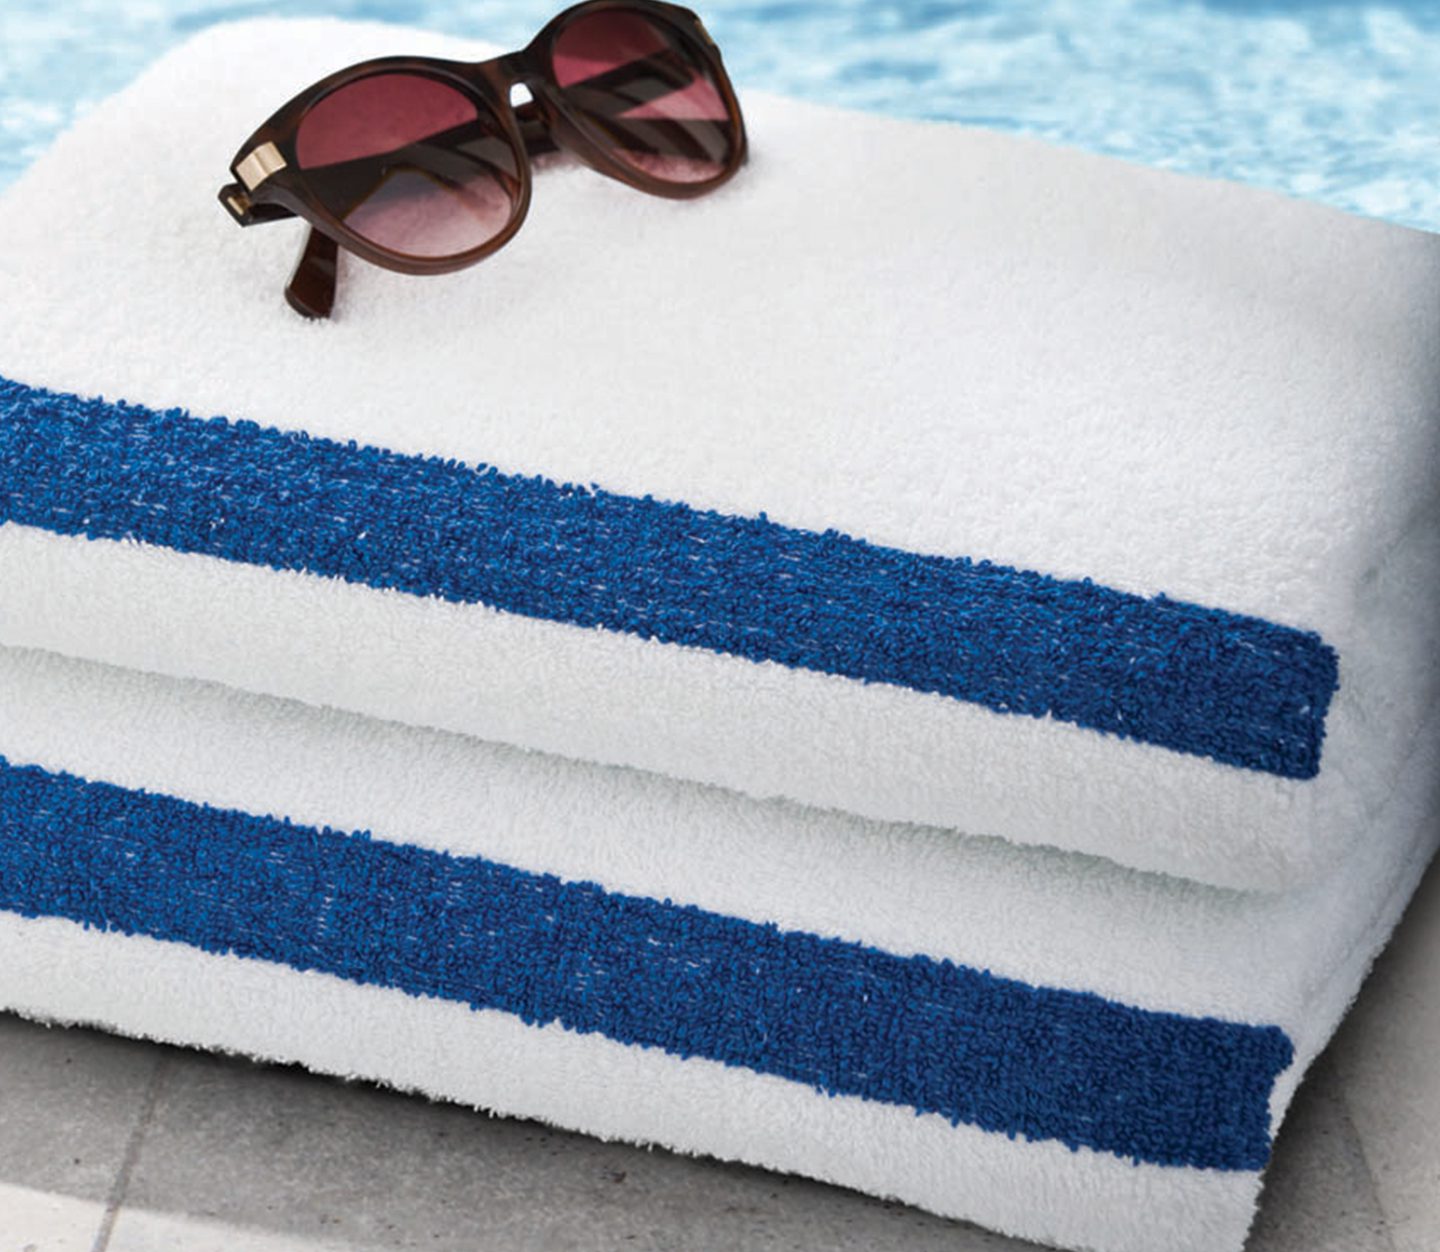 The Best Classic White Bath Towels for Any Budget